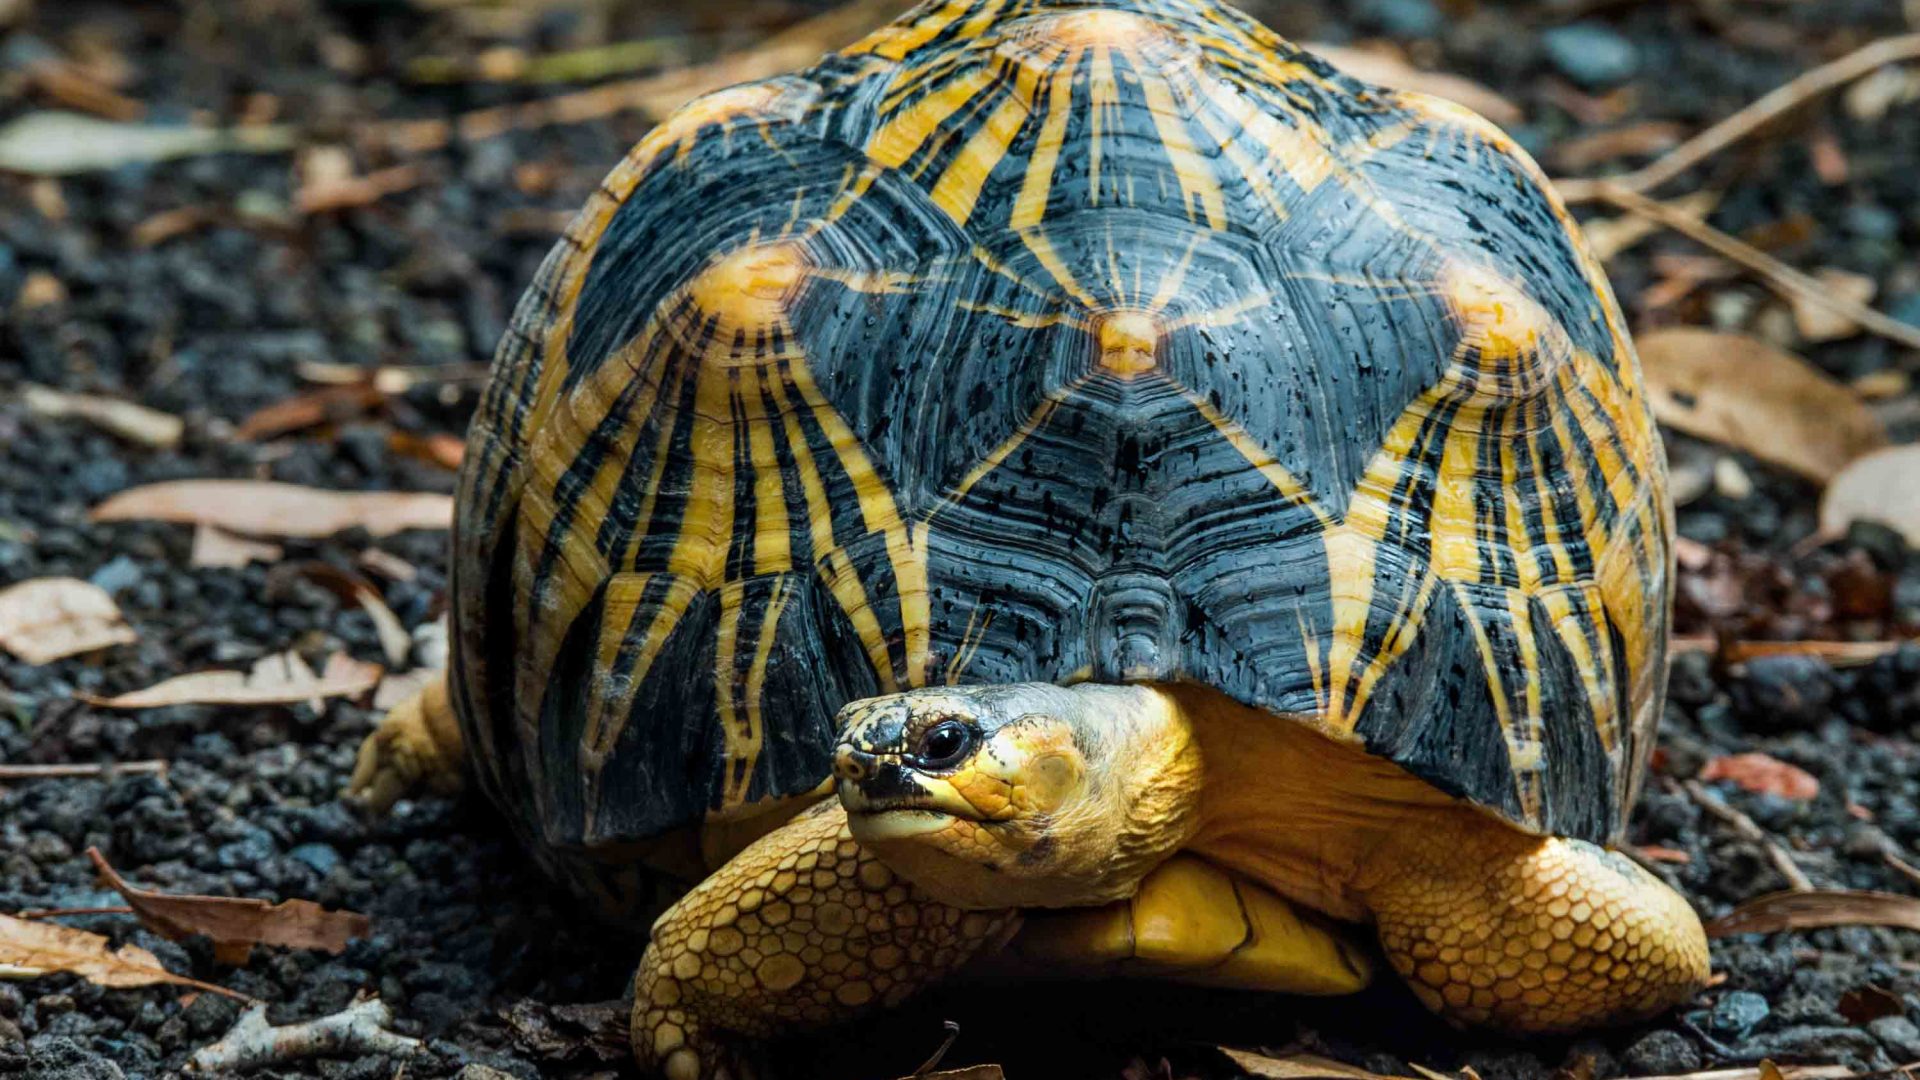 A tortoise with unique yellow patterns on its back.